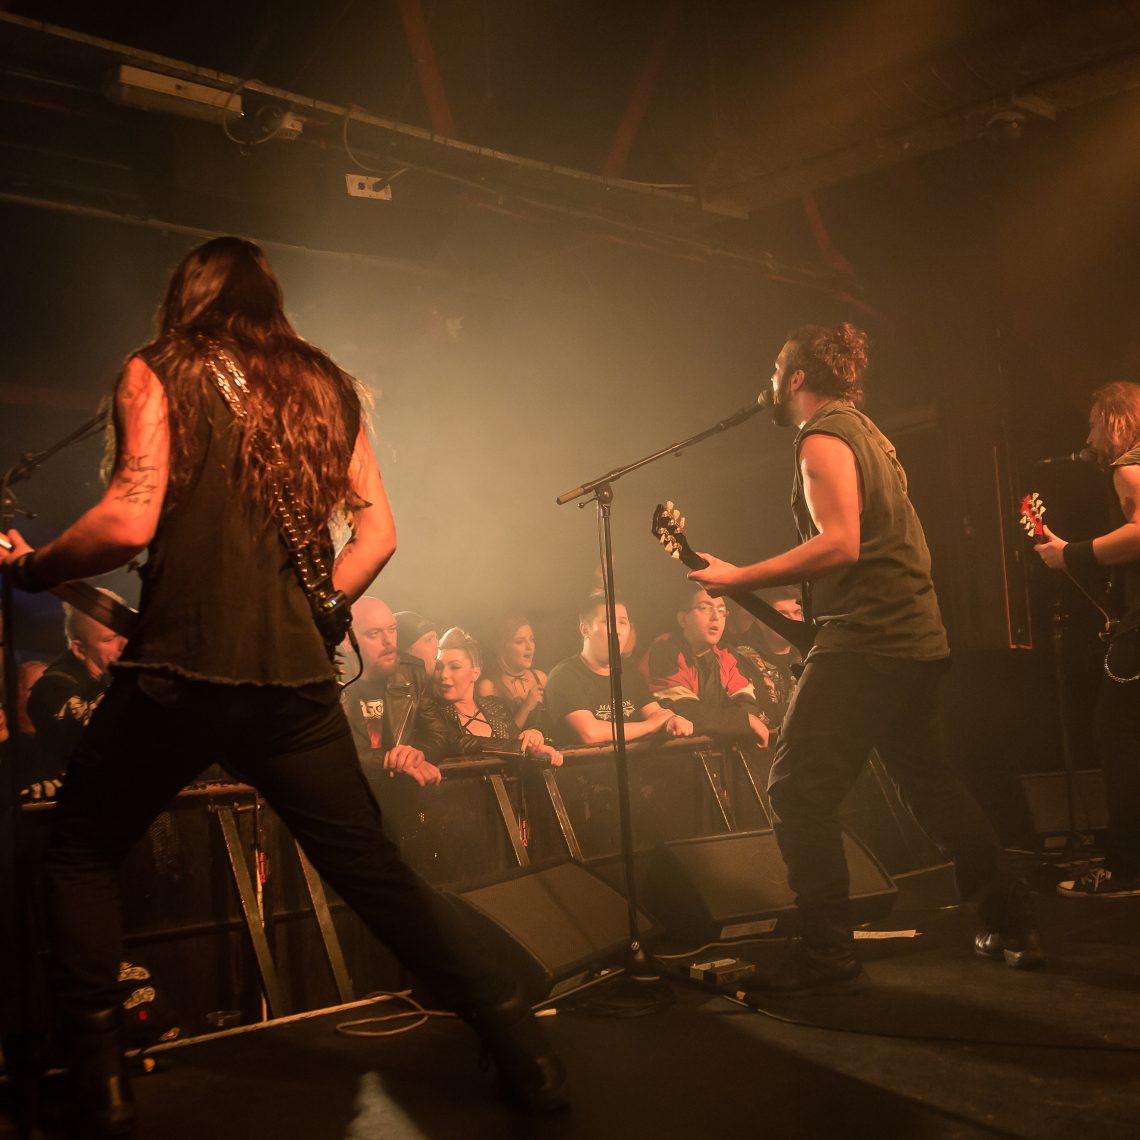 Absolva – The Defiance Tour, with Amethyst and Faith in Glory at Sound Conrol Manchester, 9th December 2017